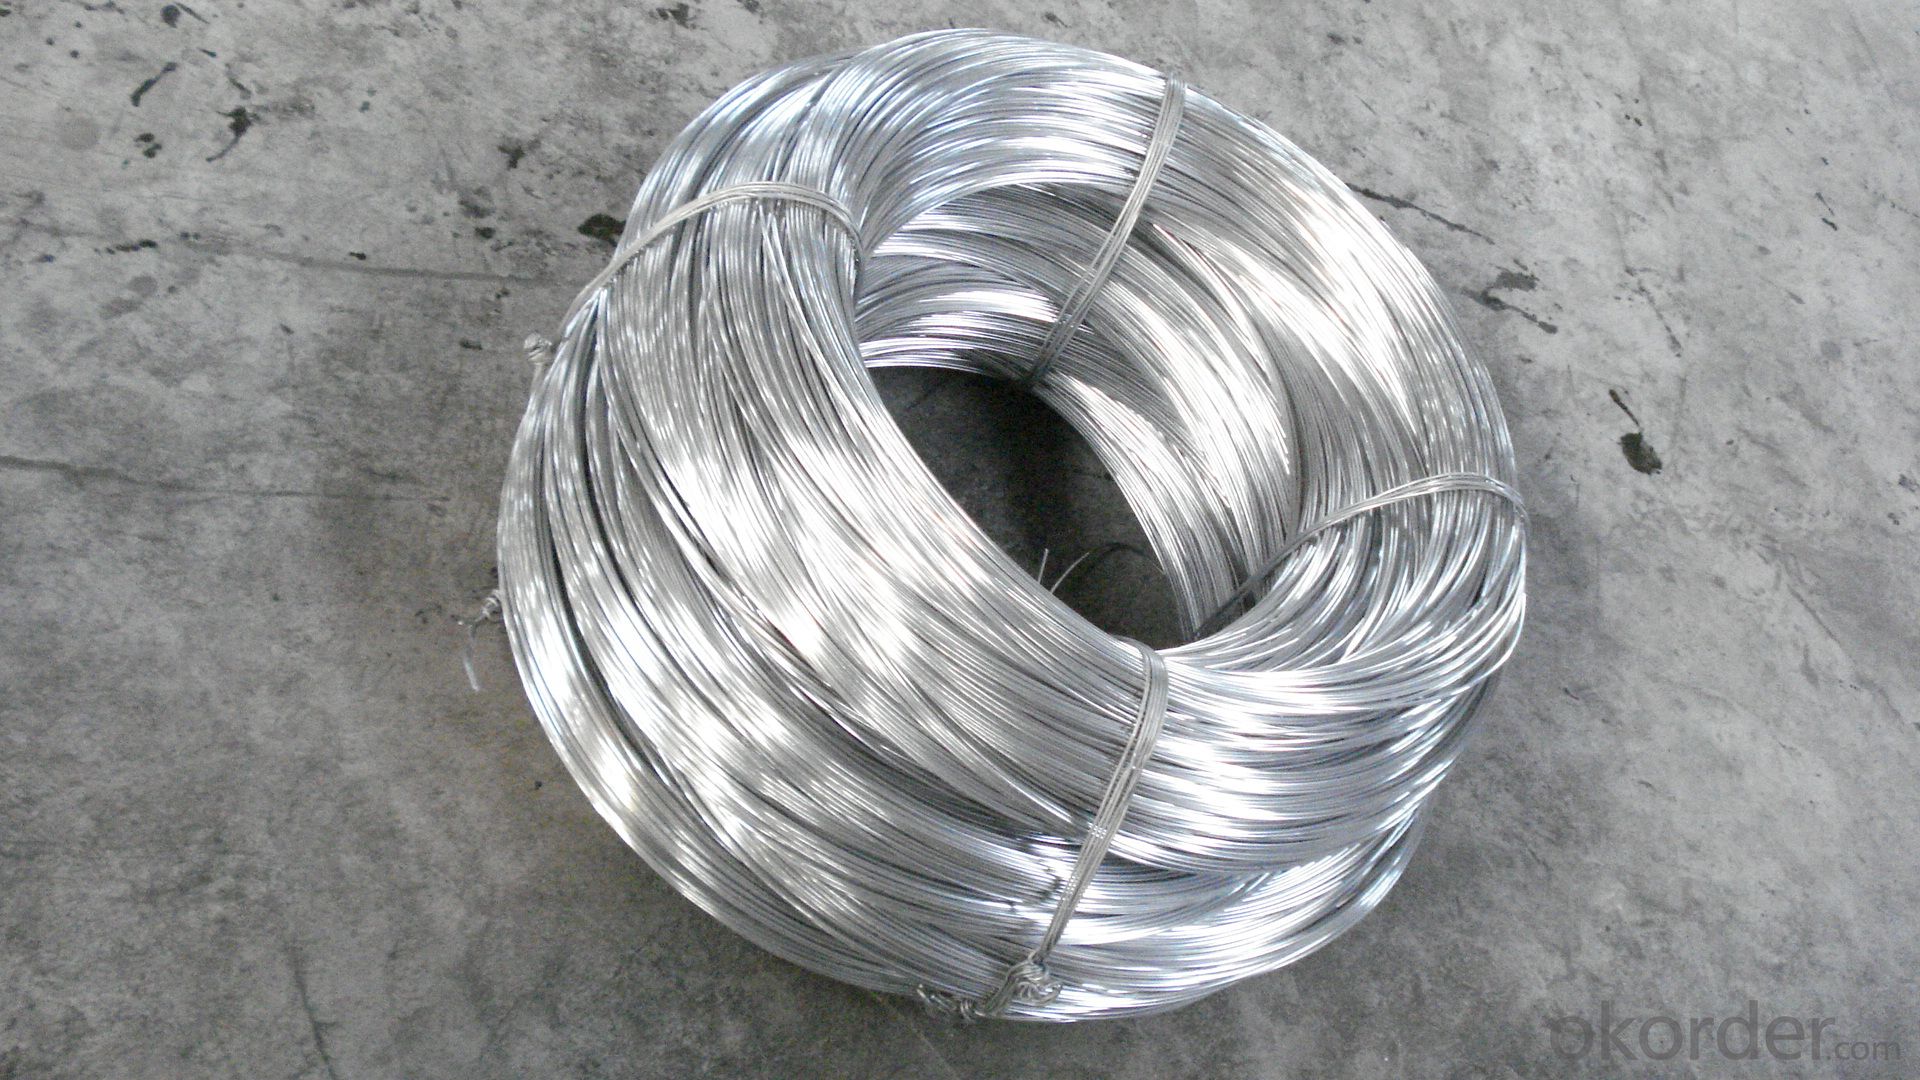 Heat-resistant Aluminum Alloy Wire Market Overview and Regional Outlook Study 2017 – 2032